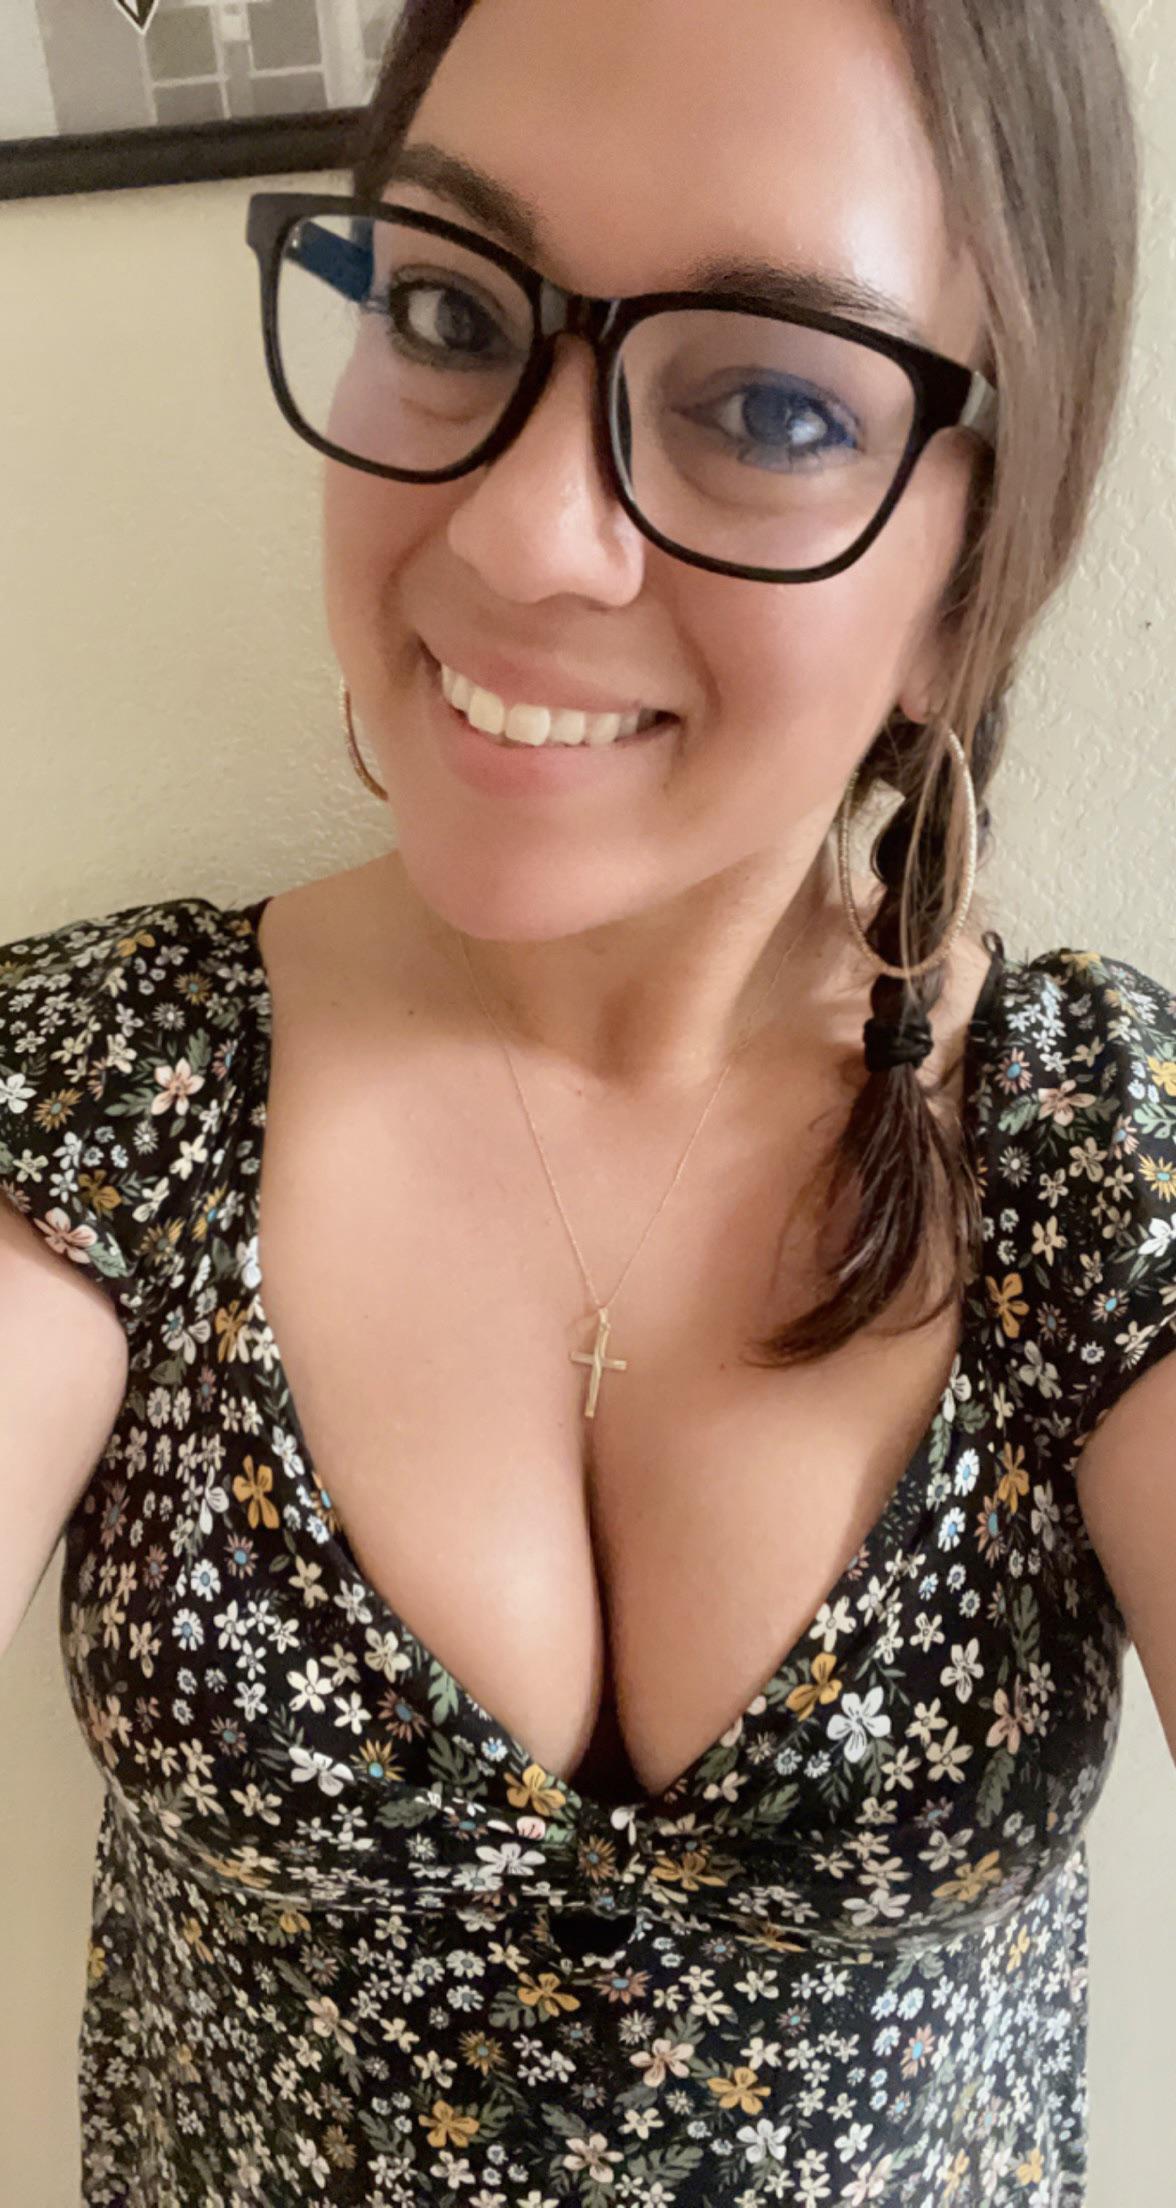 Smiles in a sweet sundress?